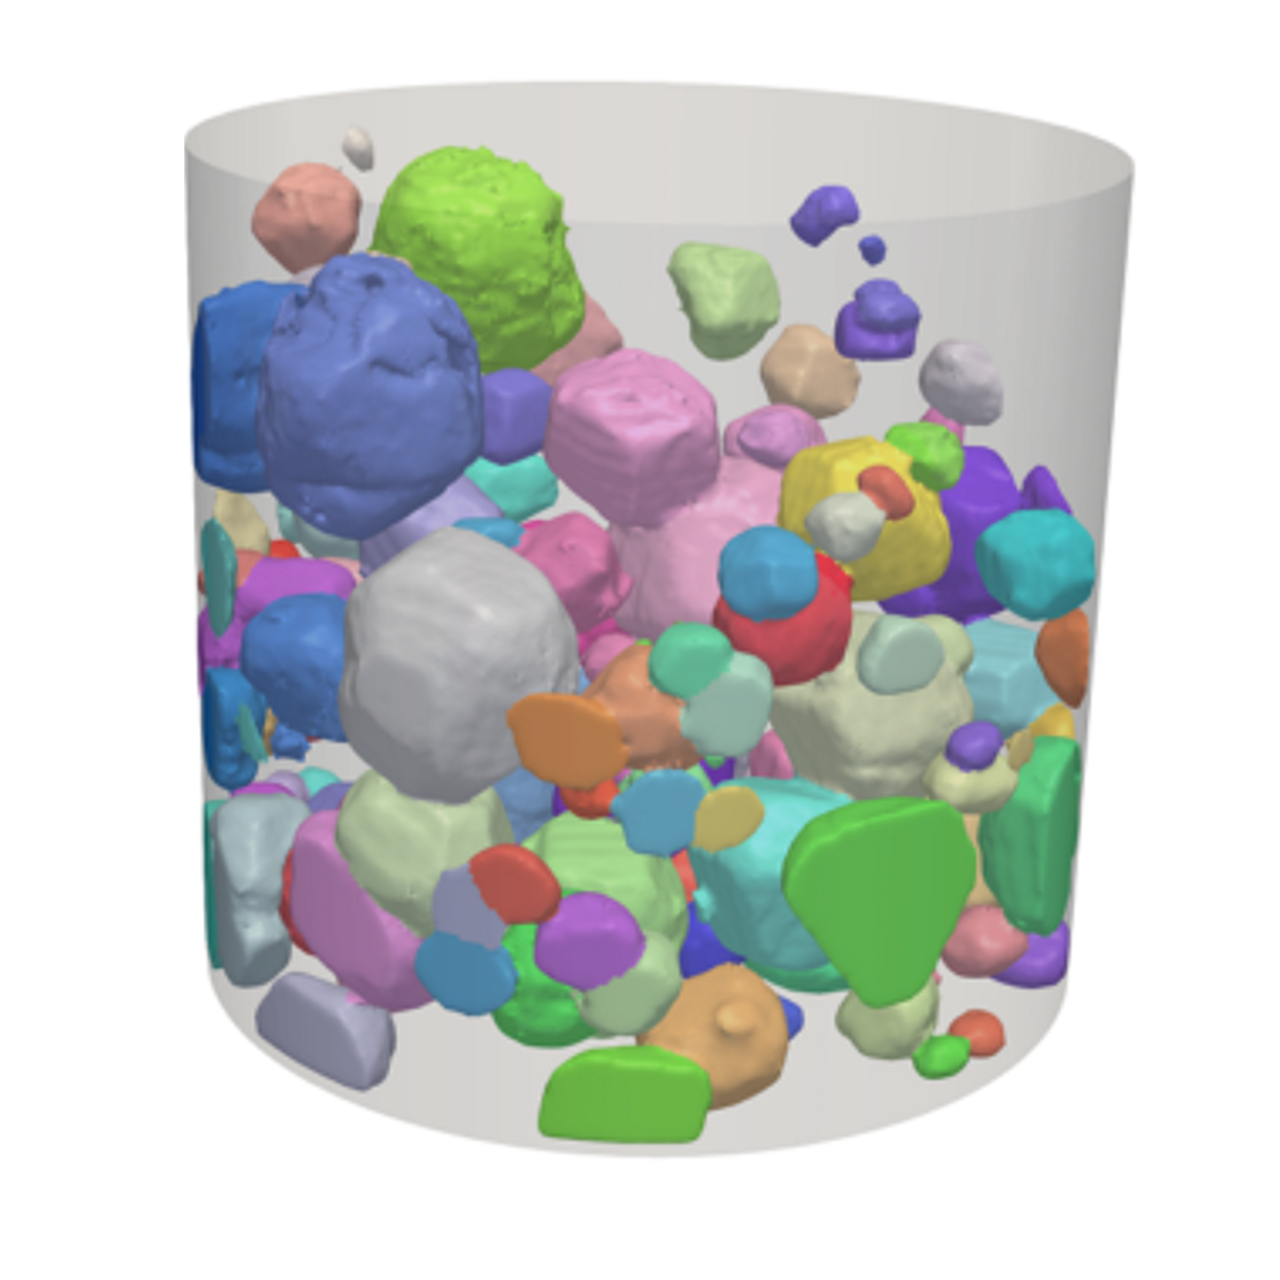 3D visualizations of all the different crystals within the powder identified by LabDCT, each colored according to their orientation.